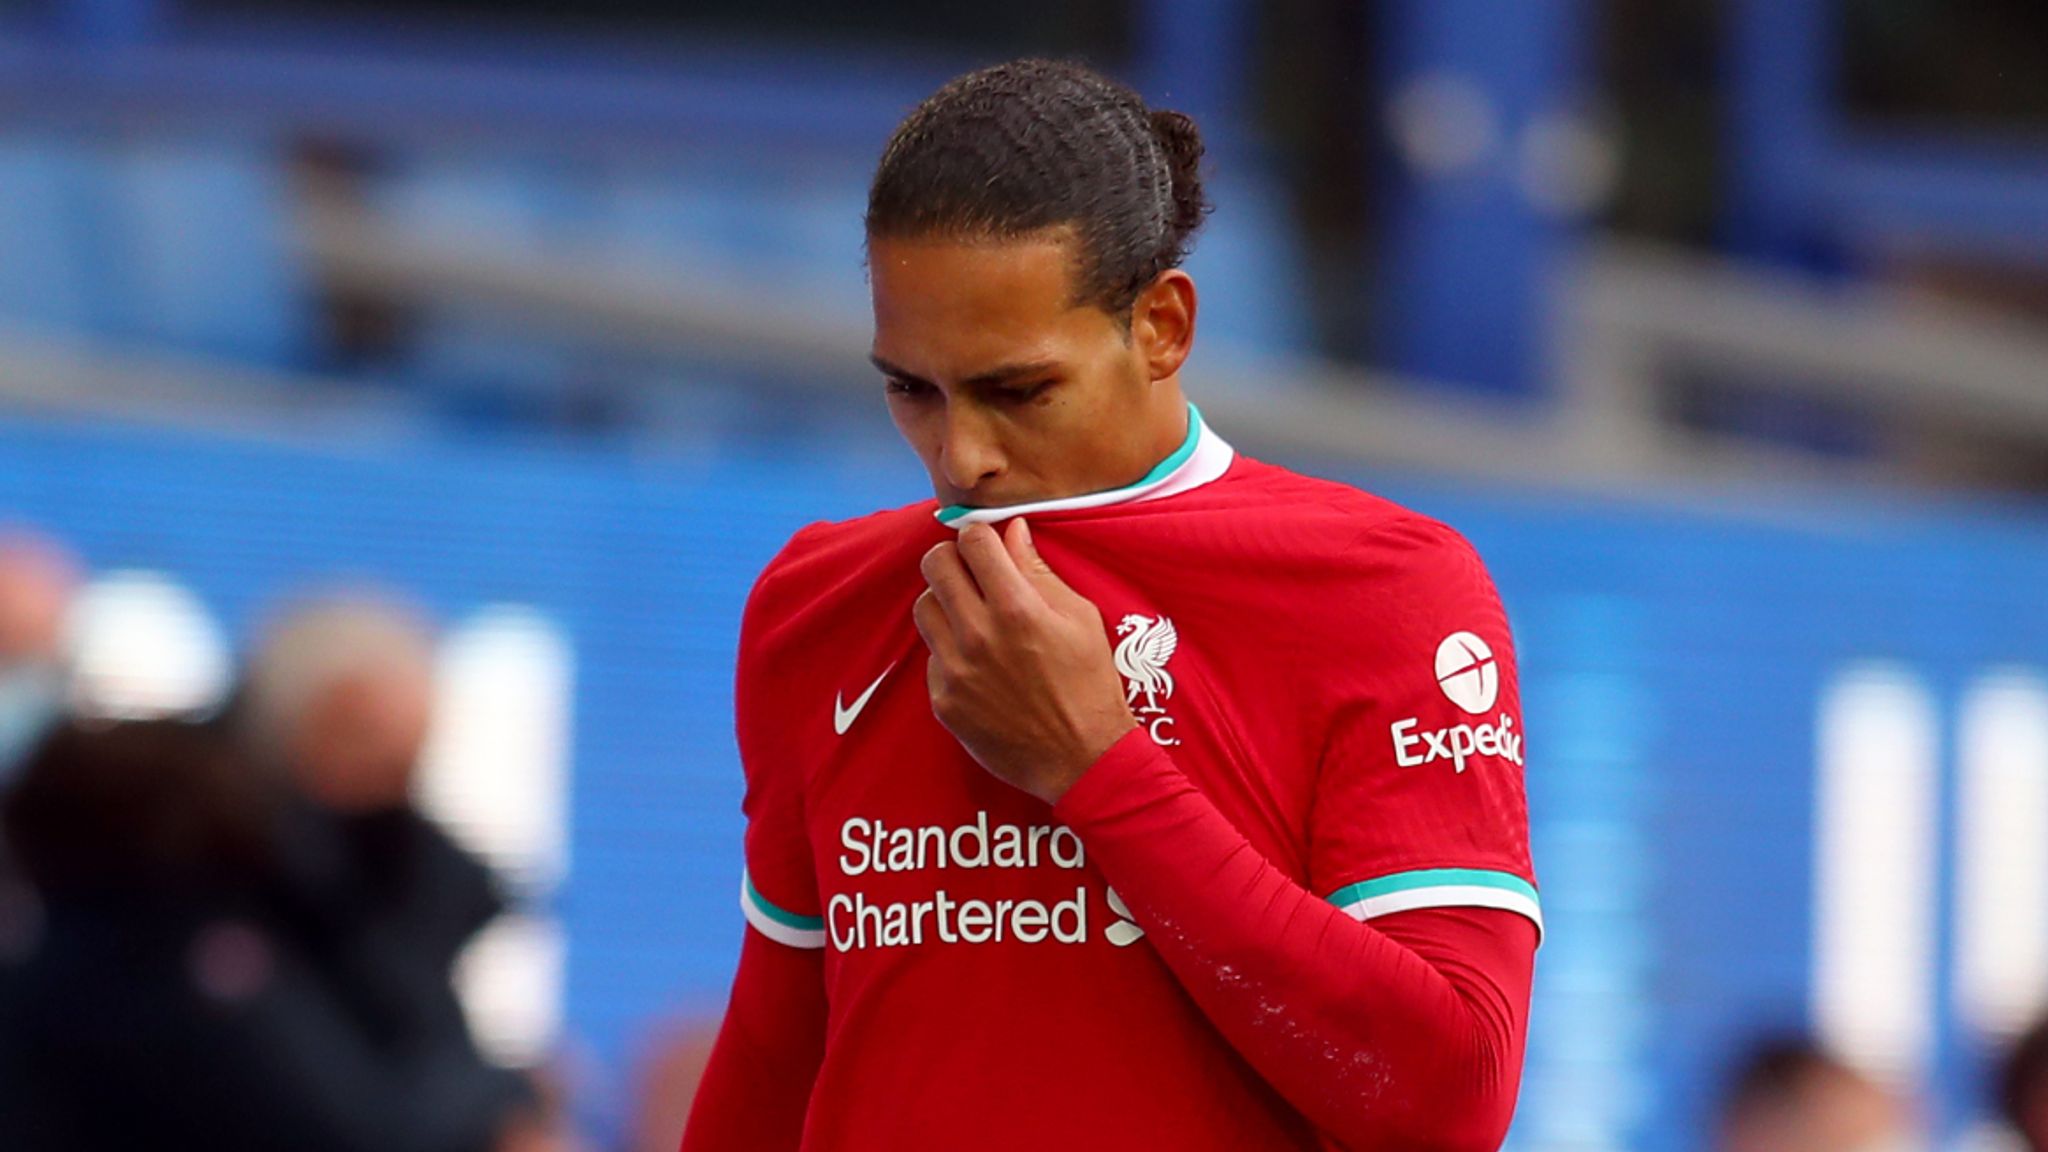 Van Dijk on the road to recovery